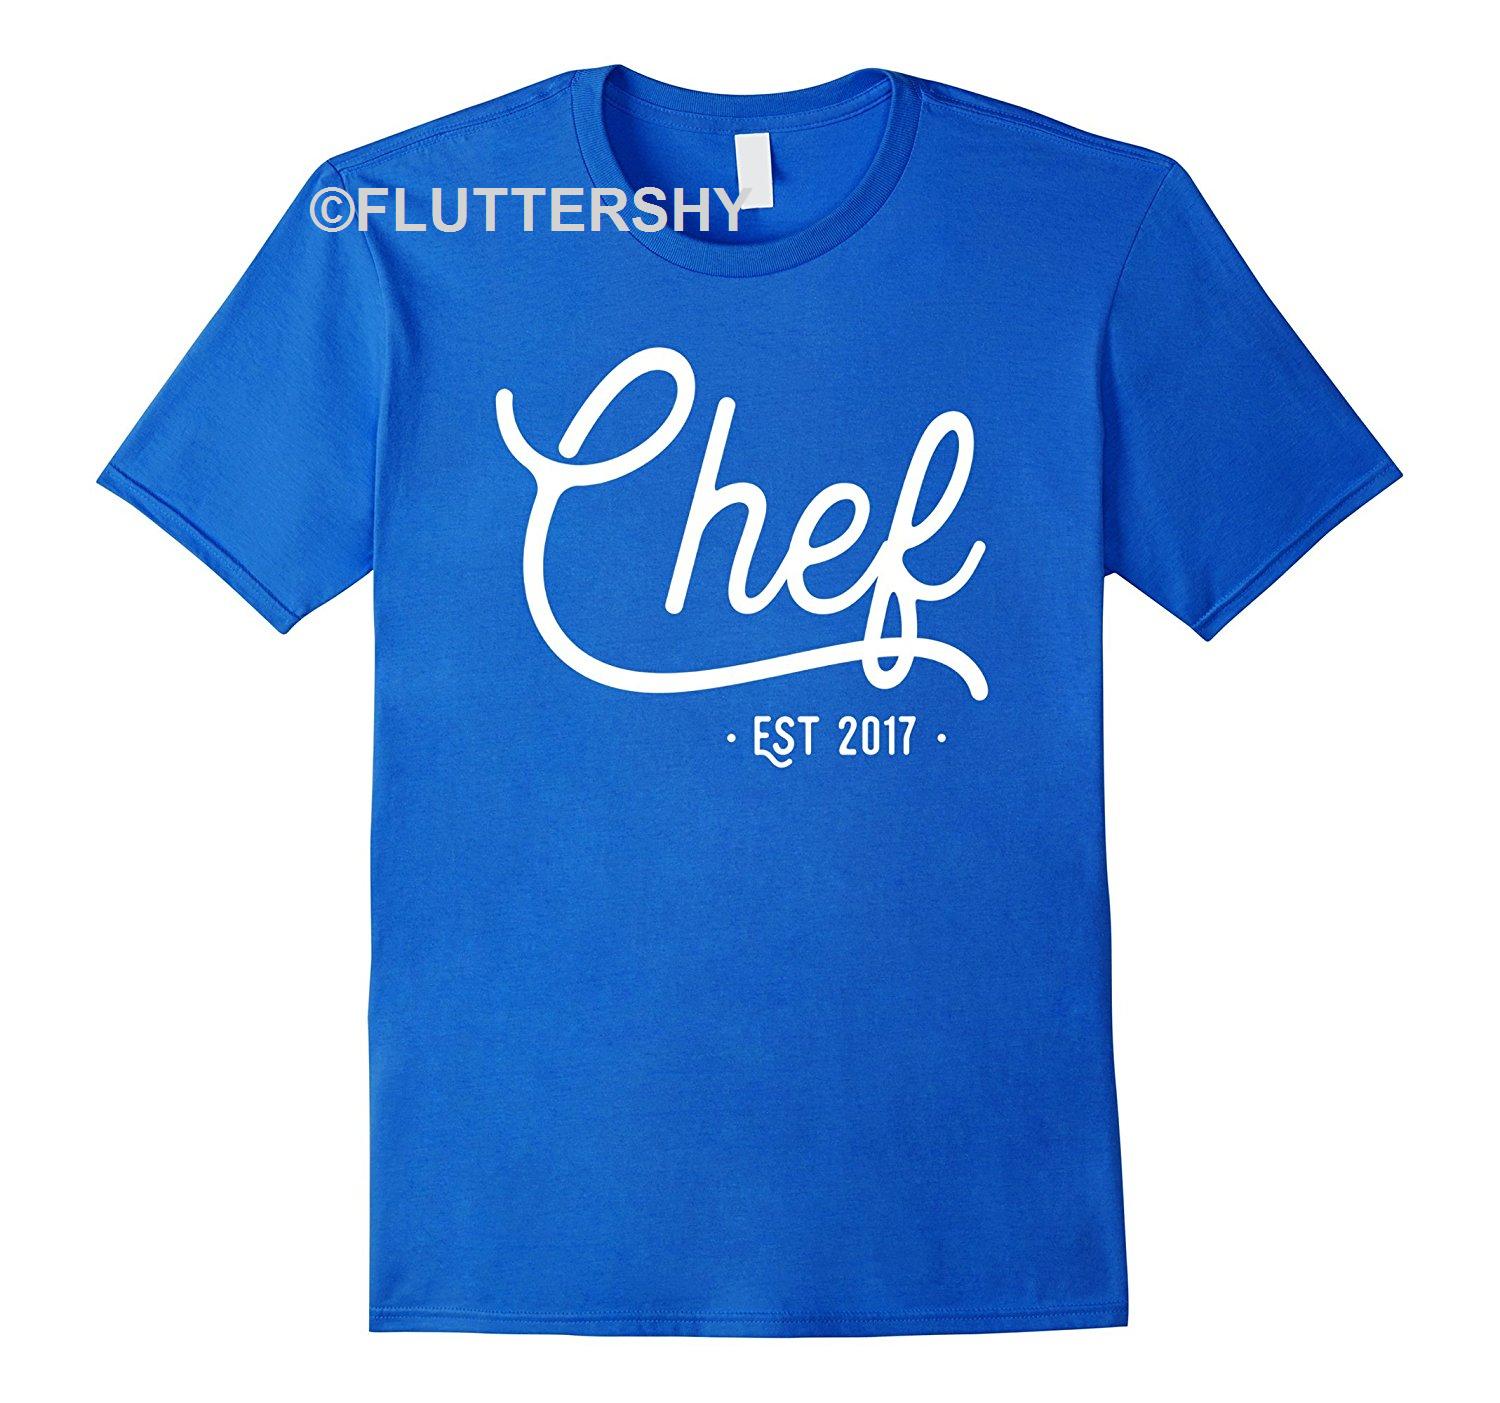 Trending Tees Get Here Chefs Graduation Gift For Culinary School Graduates 2017 Shirts